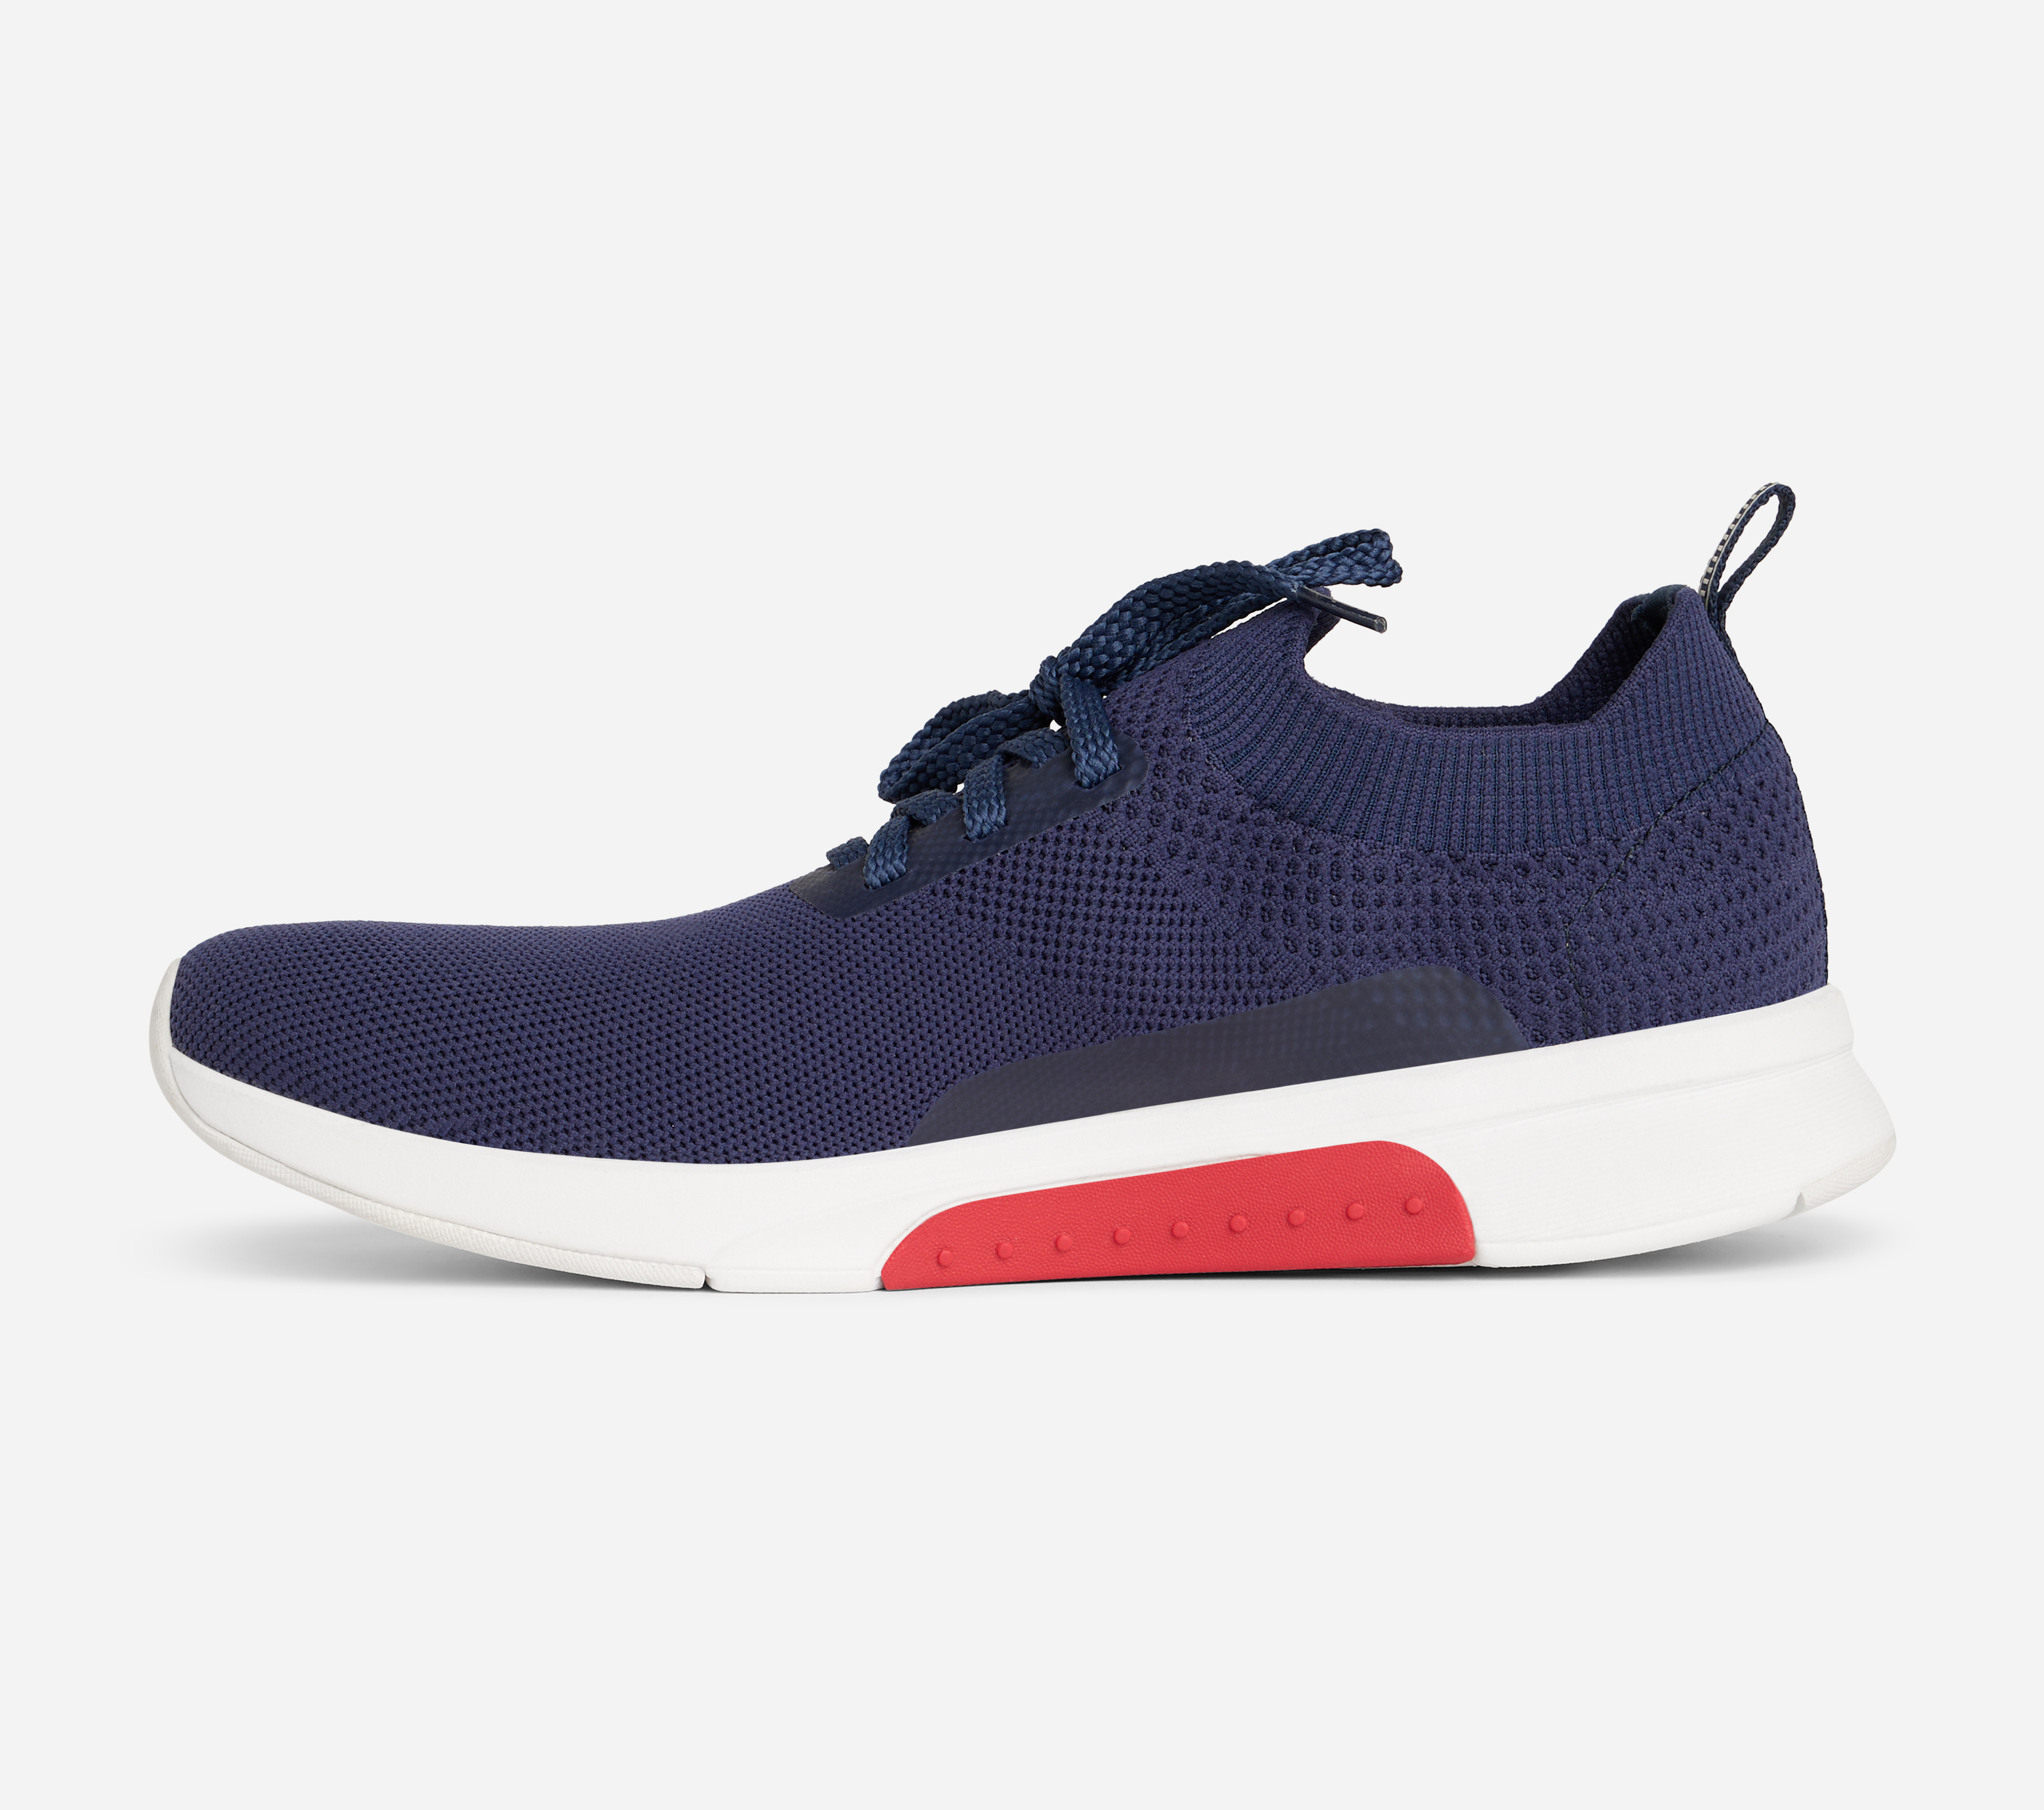 MODERN JOGGER - NATIONAL, NAVY/WHITE Footwear Lateral View